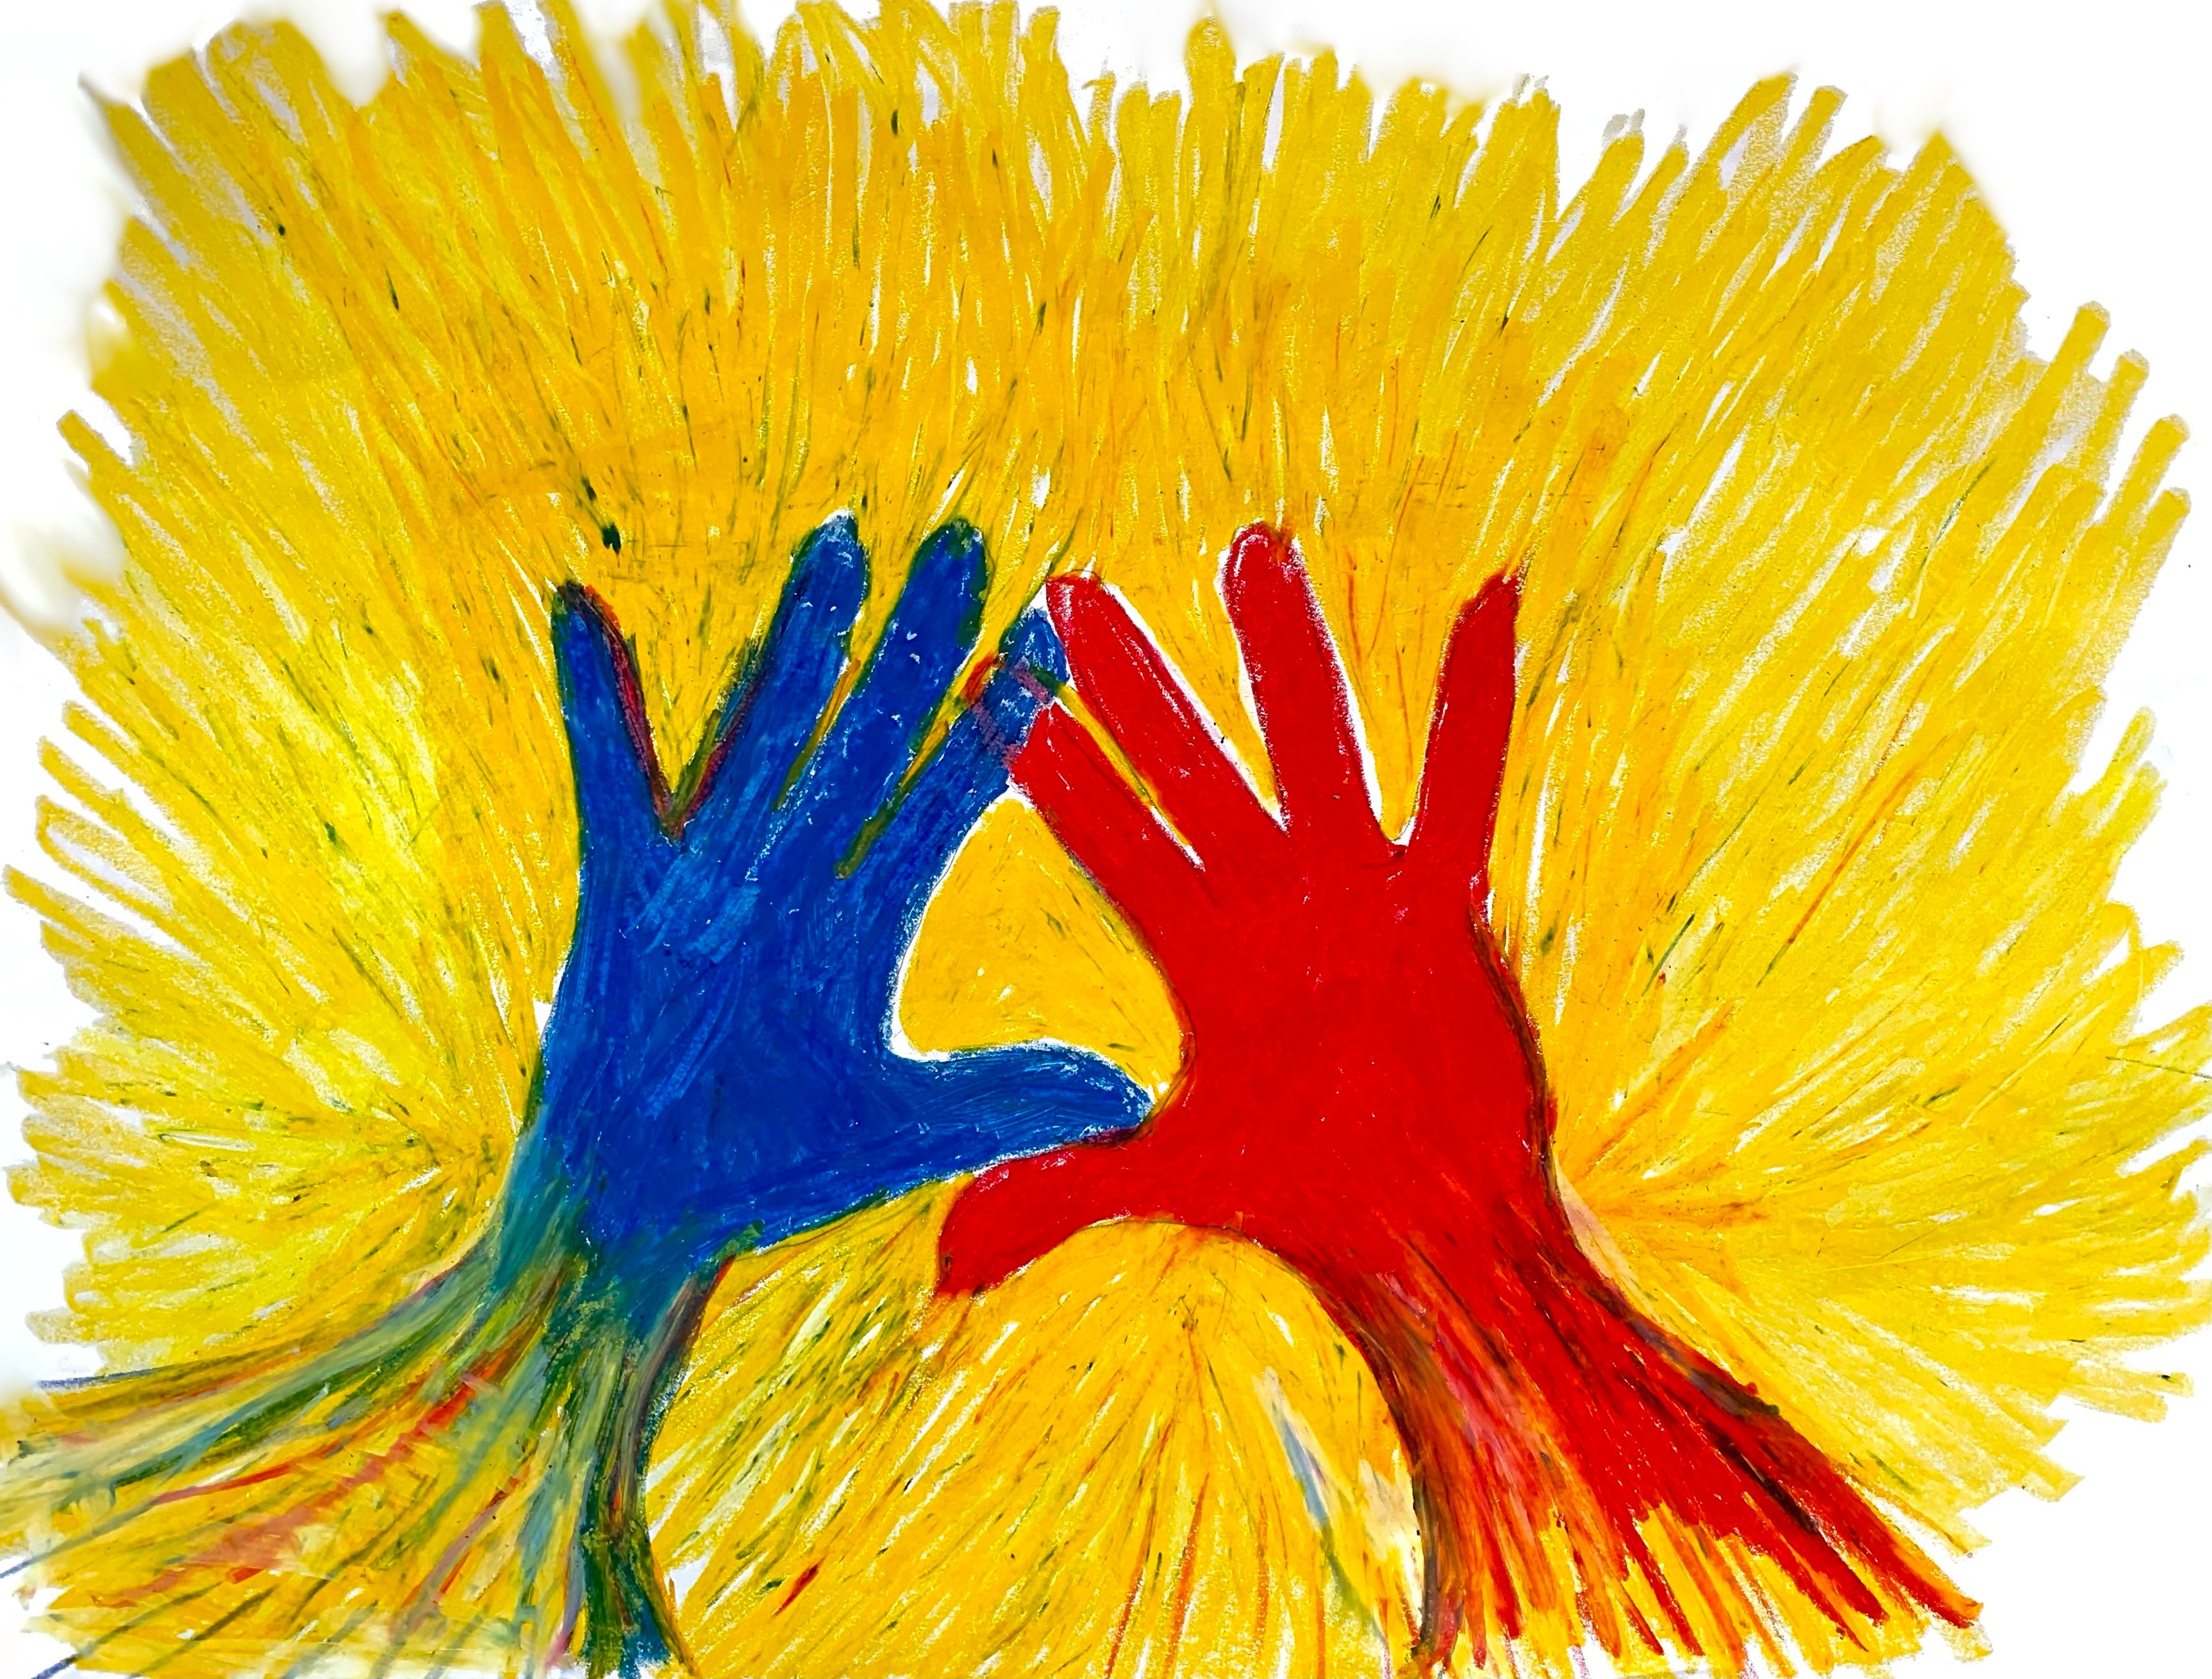 painting of 2 hands one red and one blue